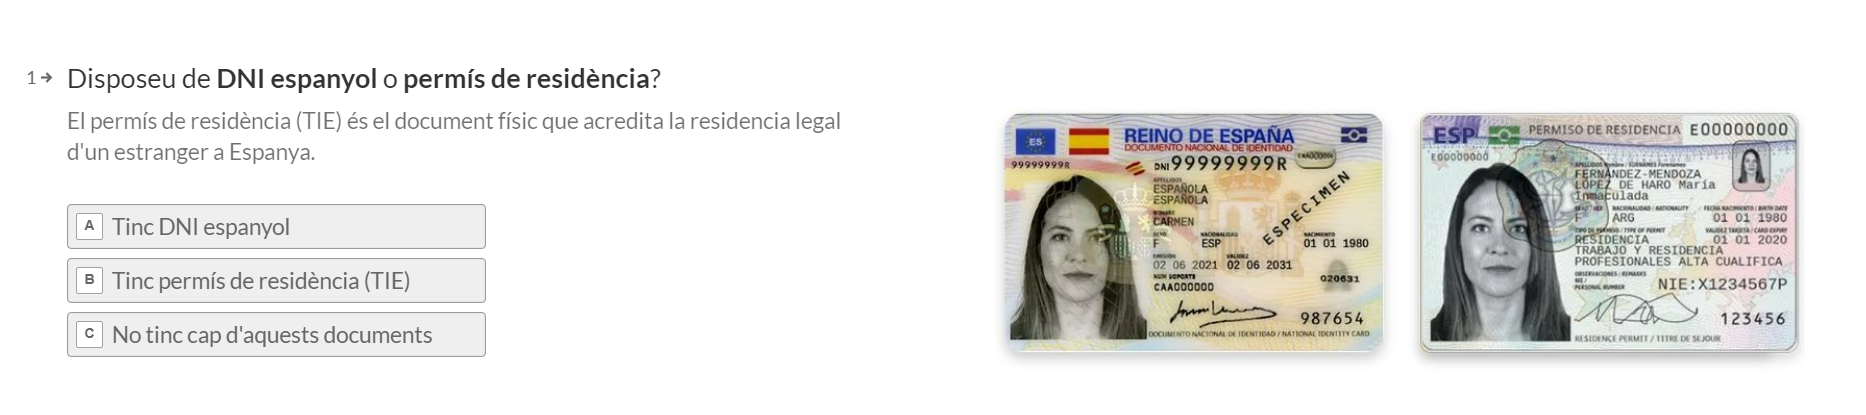 Ask if you have a Spanish ID card or residence permit